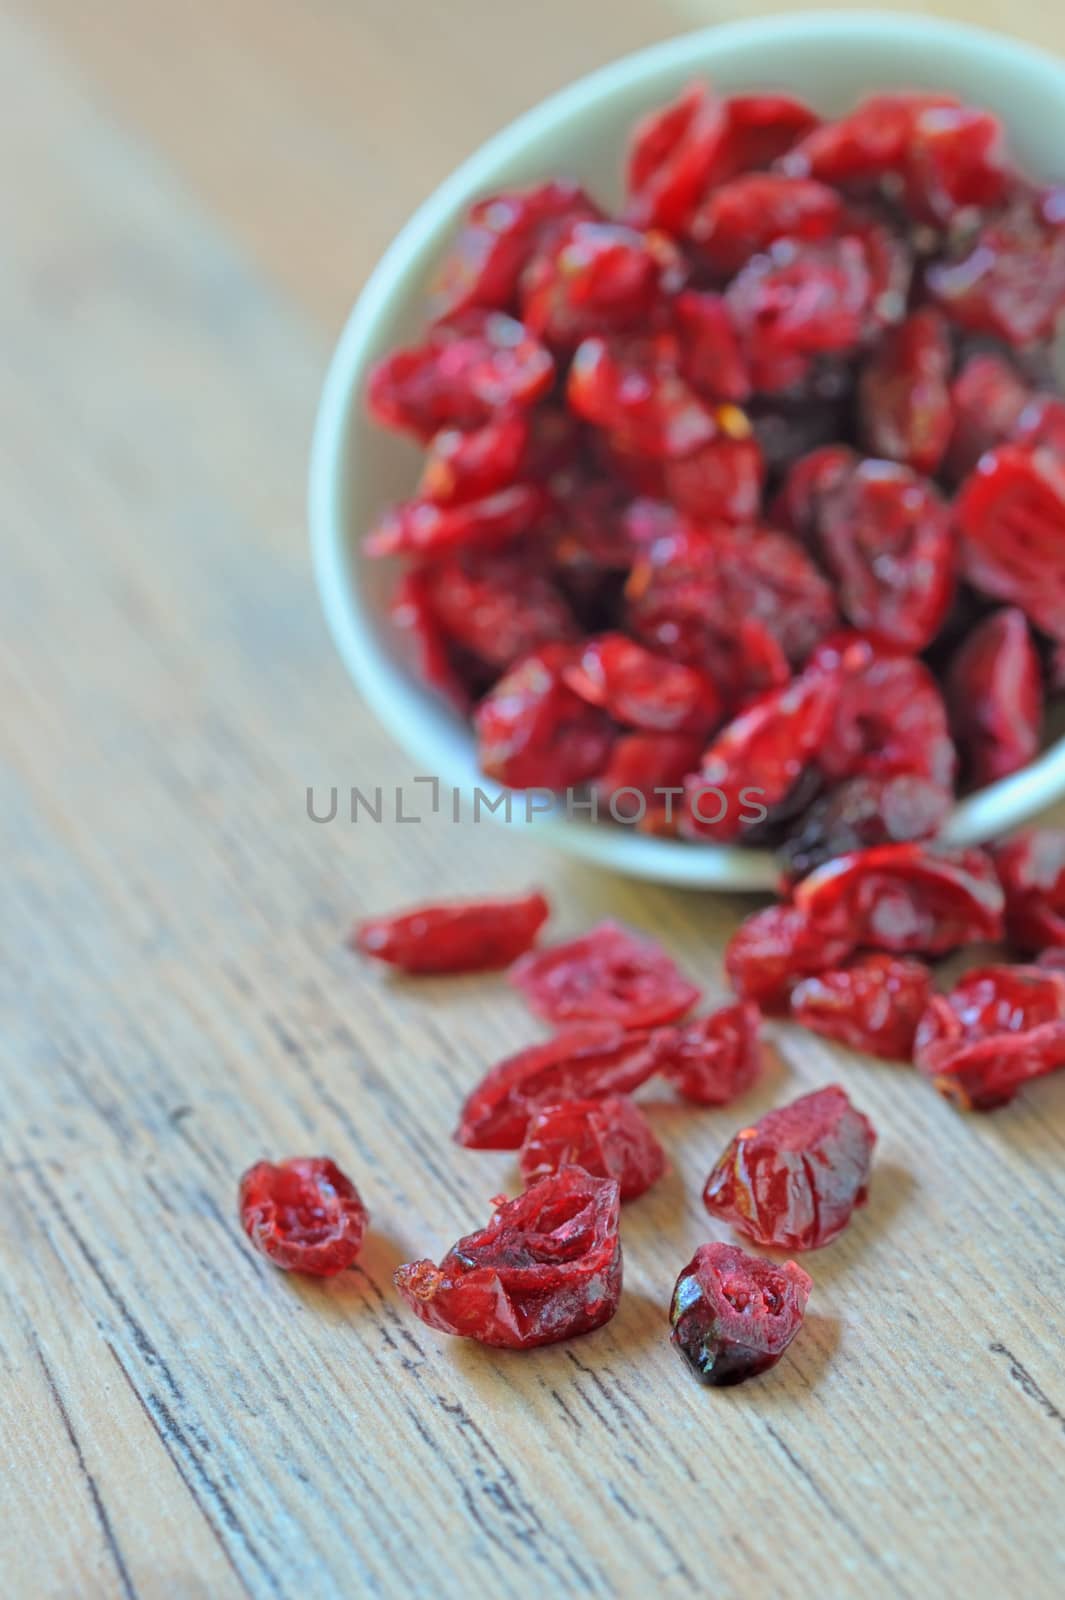 dried cranberries by mady70